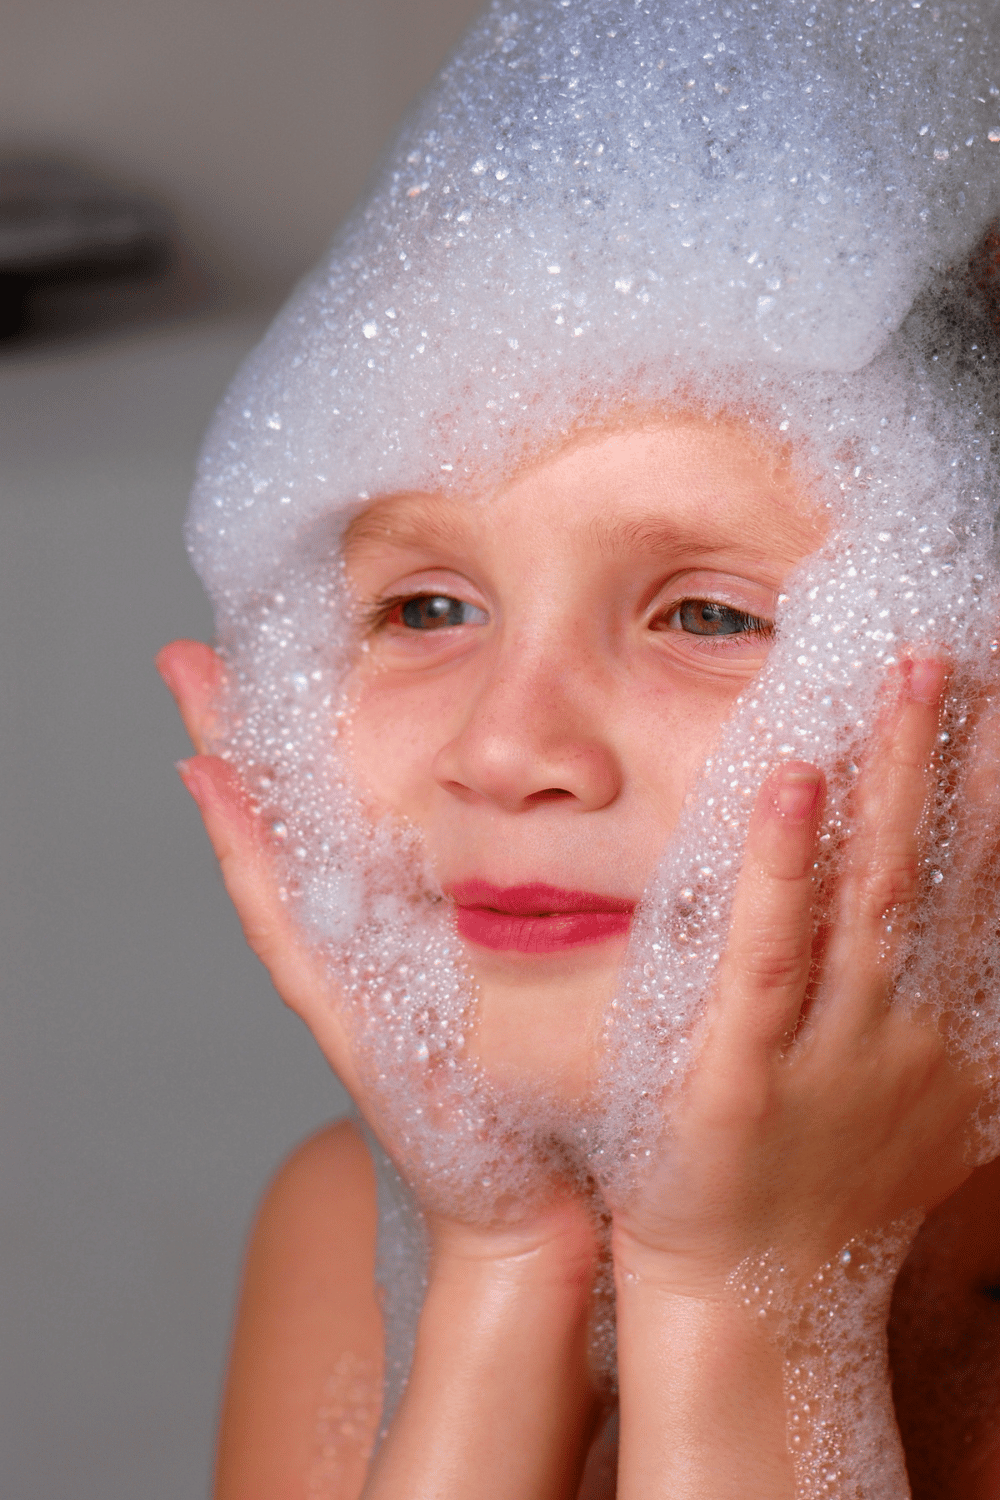 4 Tips to Help Your Children Take Care of Their Own Personal Hygiene